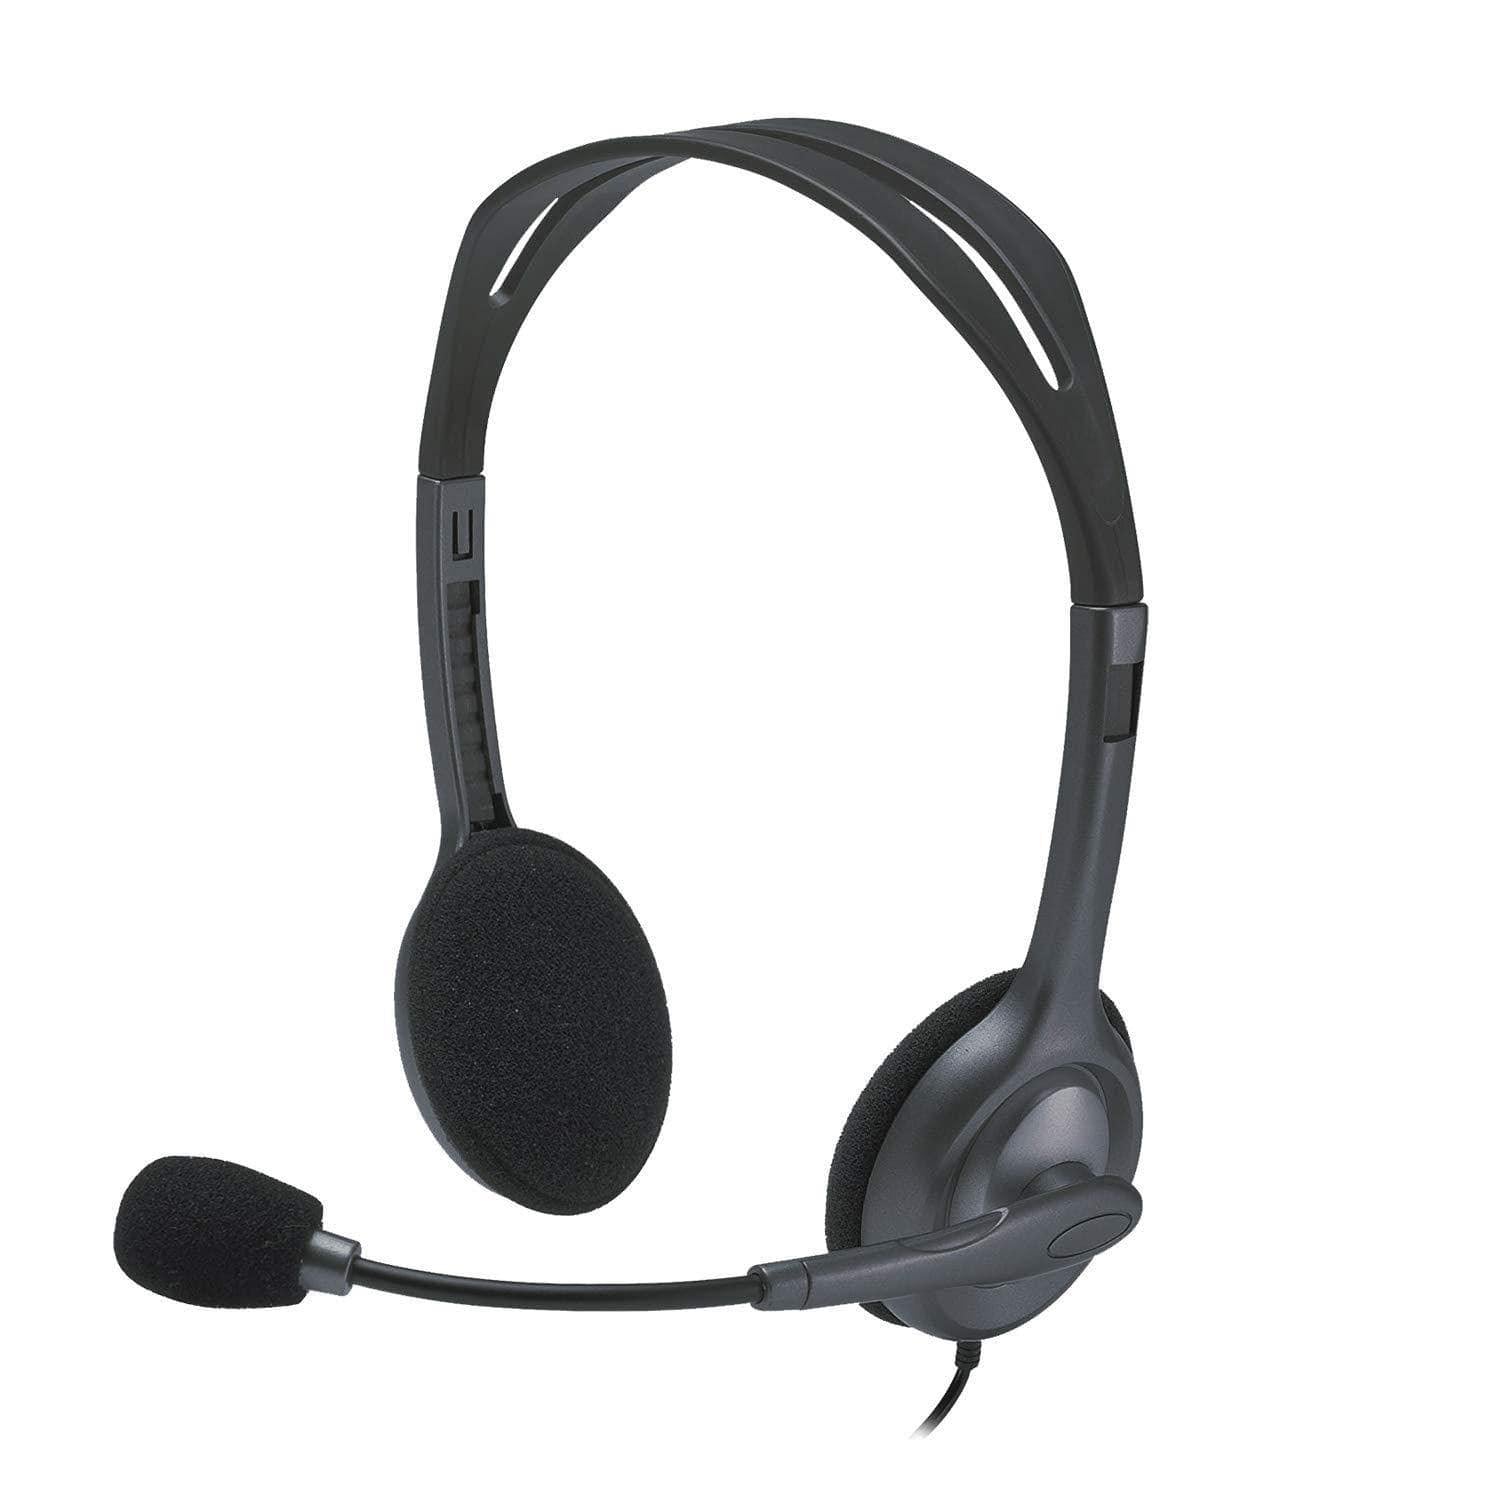 UnBelievable deal] Logitech H111 Wired Headphones with Mic Single 3.5